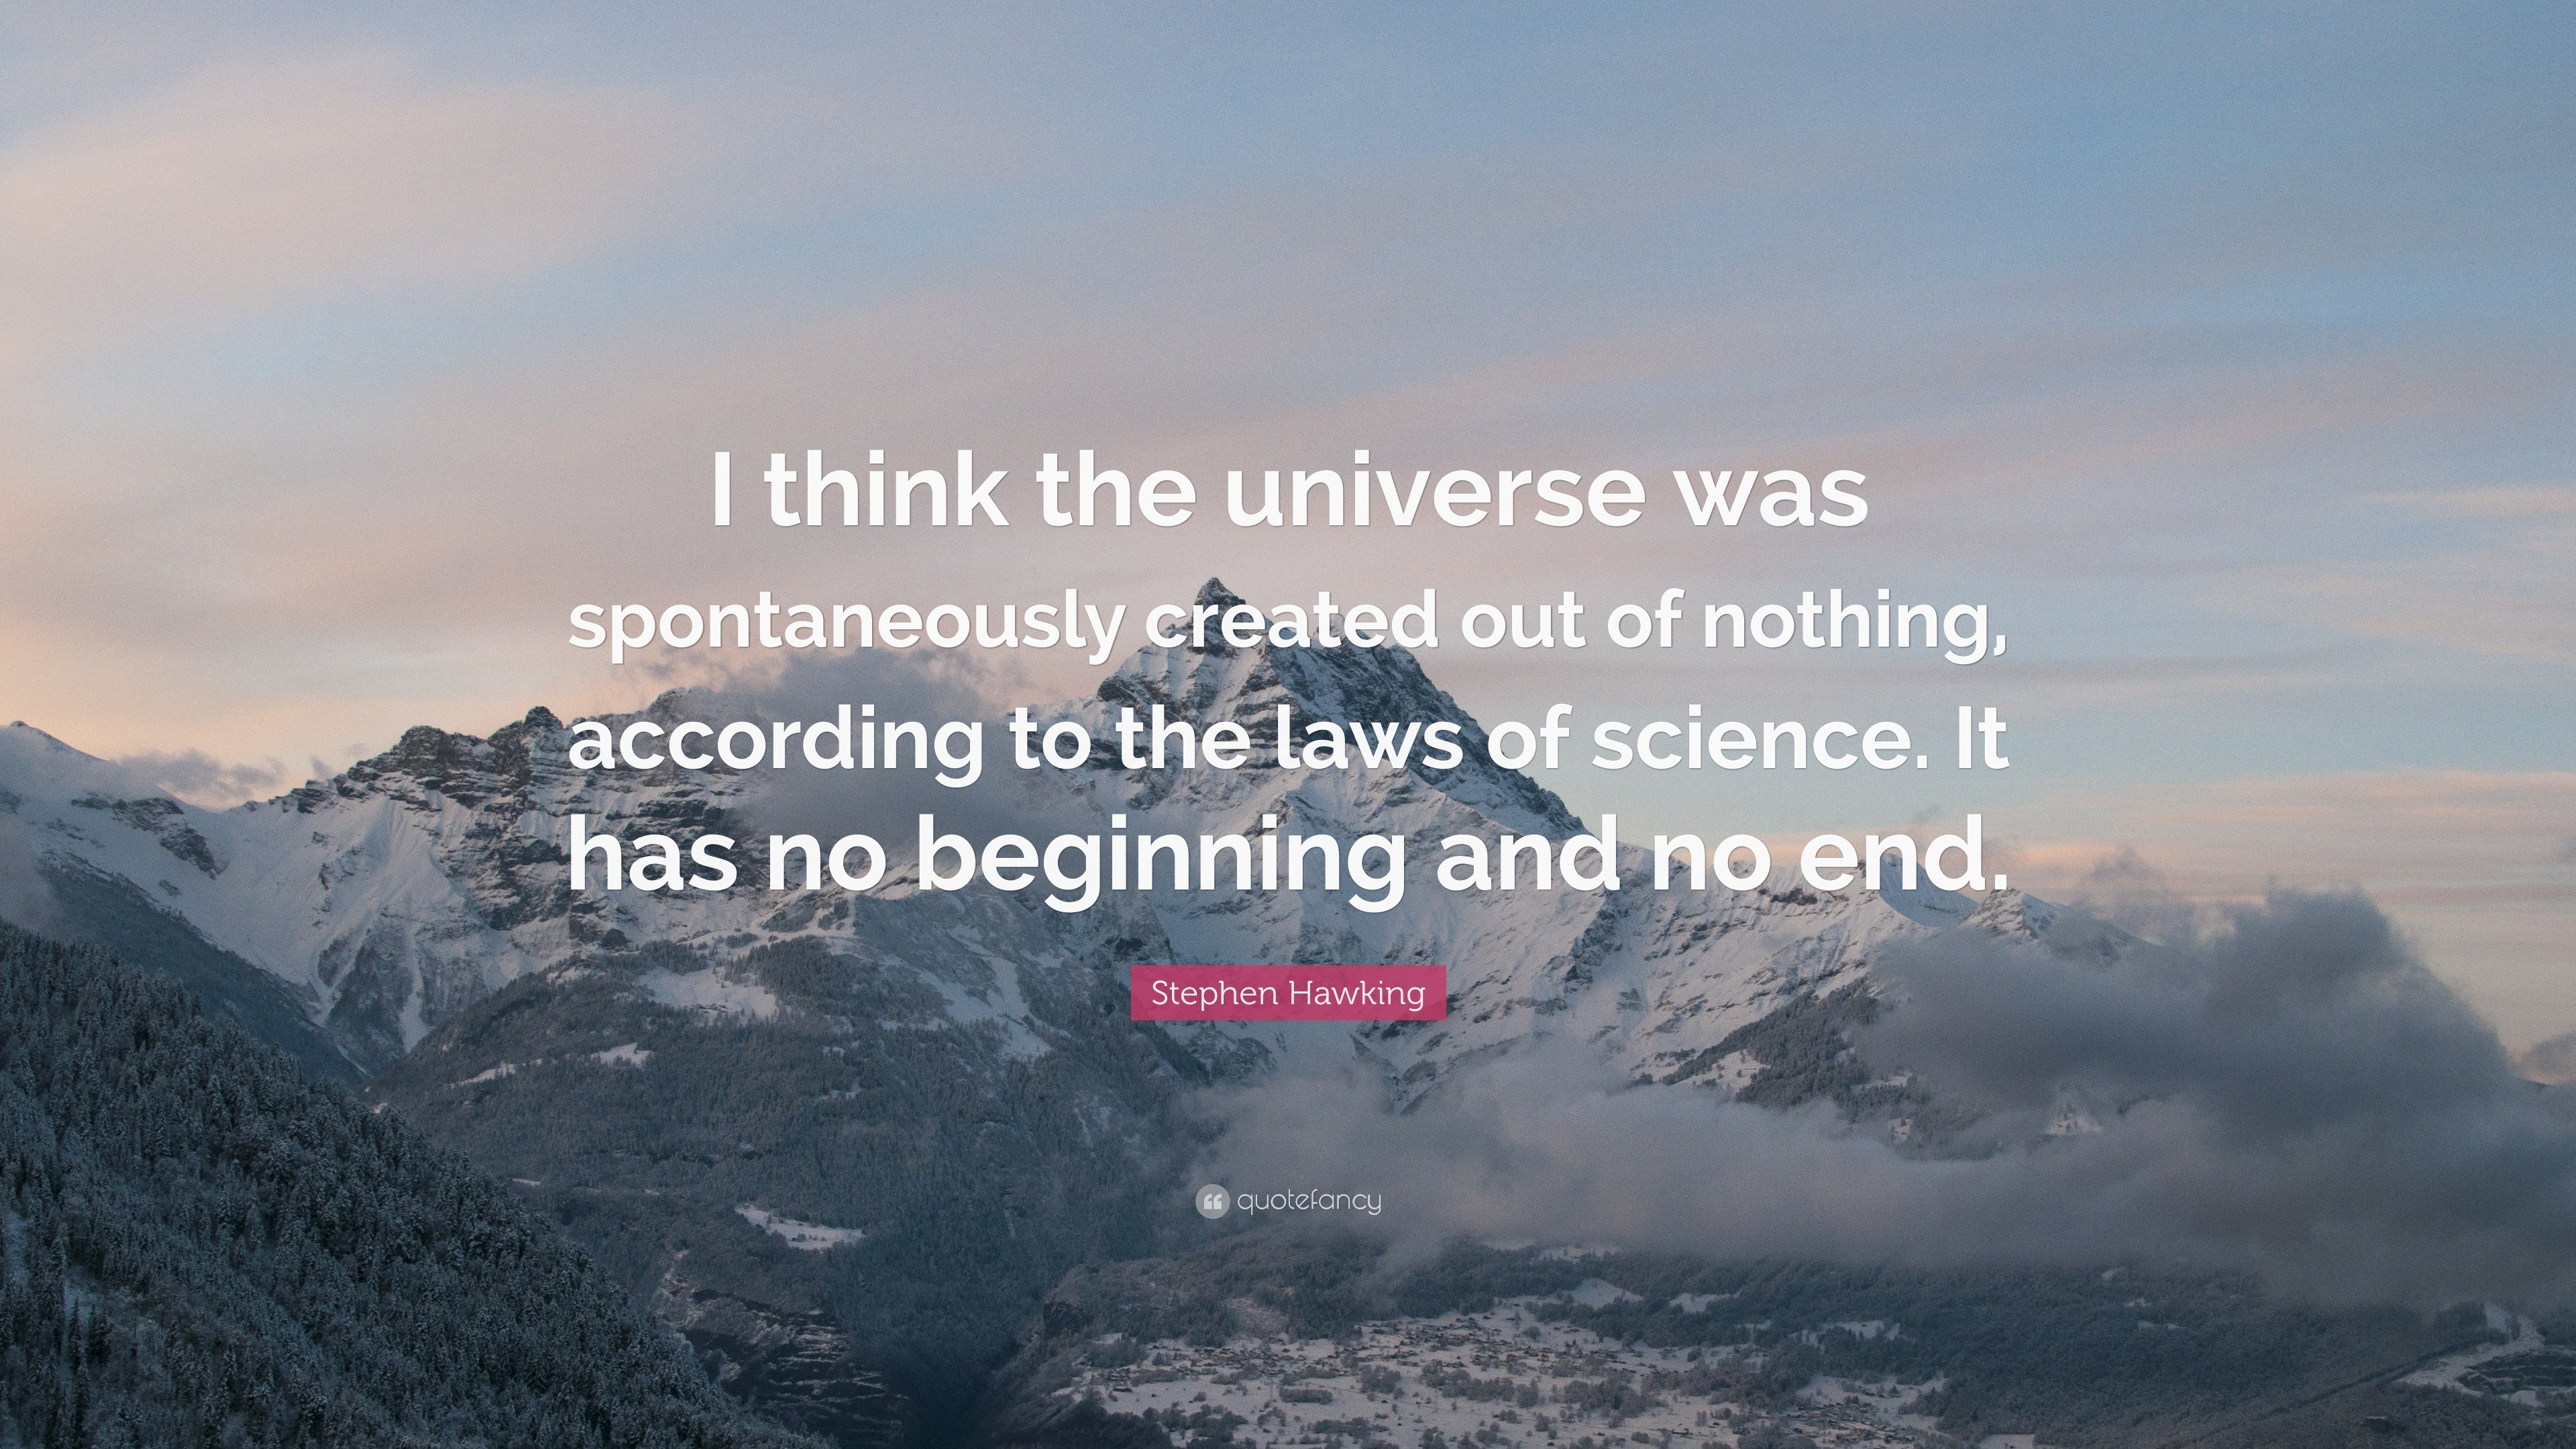 Stephen Hawking Quote: “I think the universe was spontaneously created ...